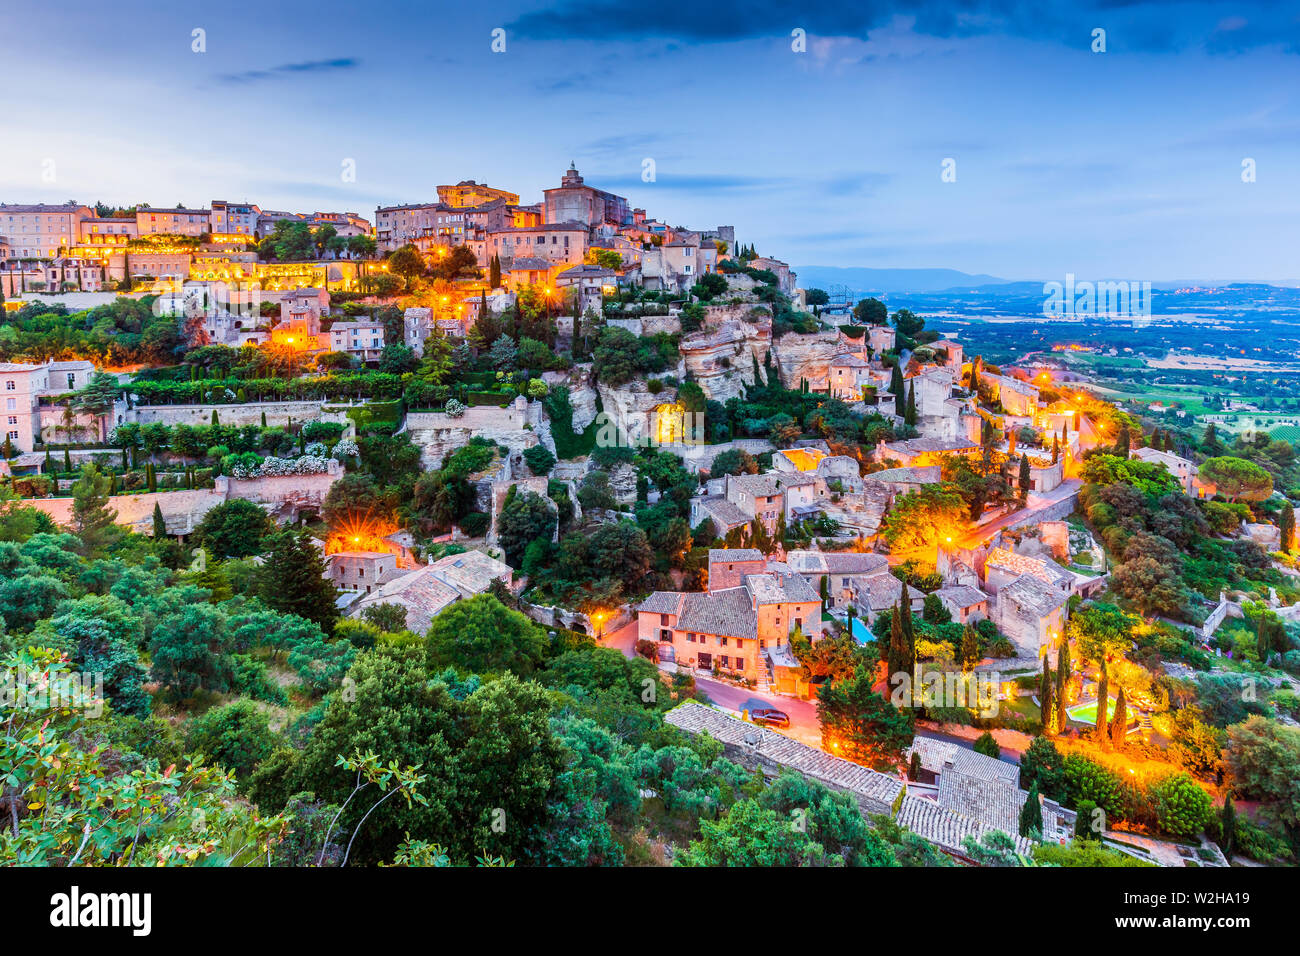 Arial view of Gordes, a small medieval town in Provence, France. Stock Photo